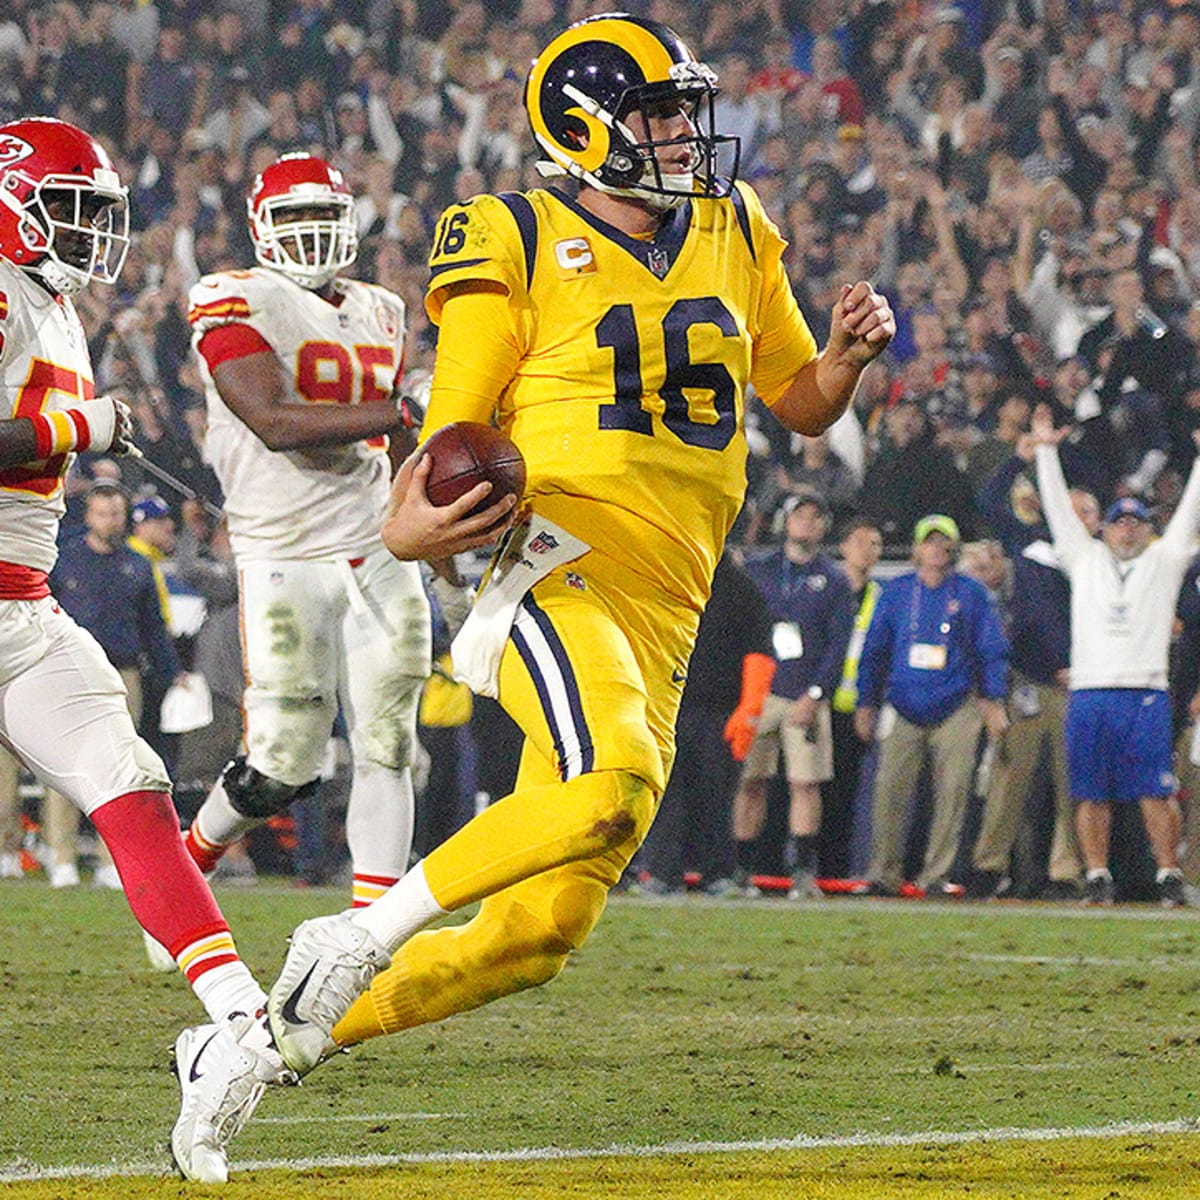 Potential classic on Monday night in Chiefs-Rams, now in LA